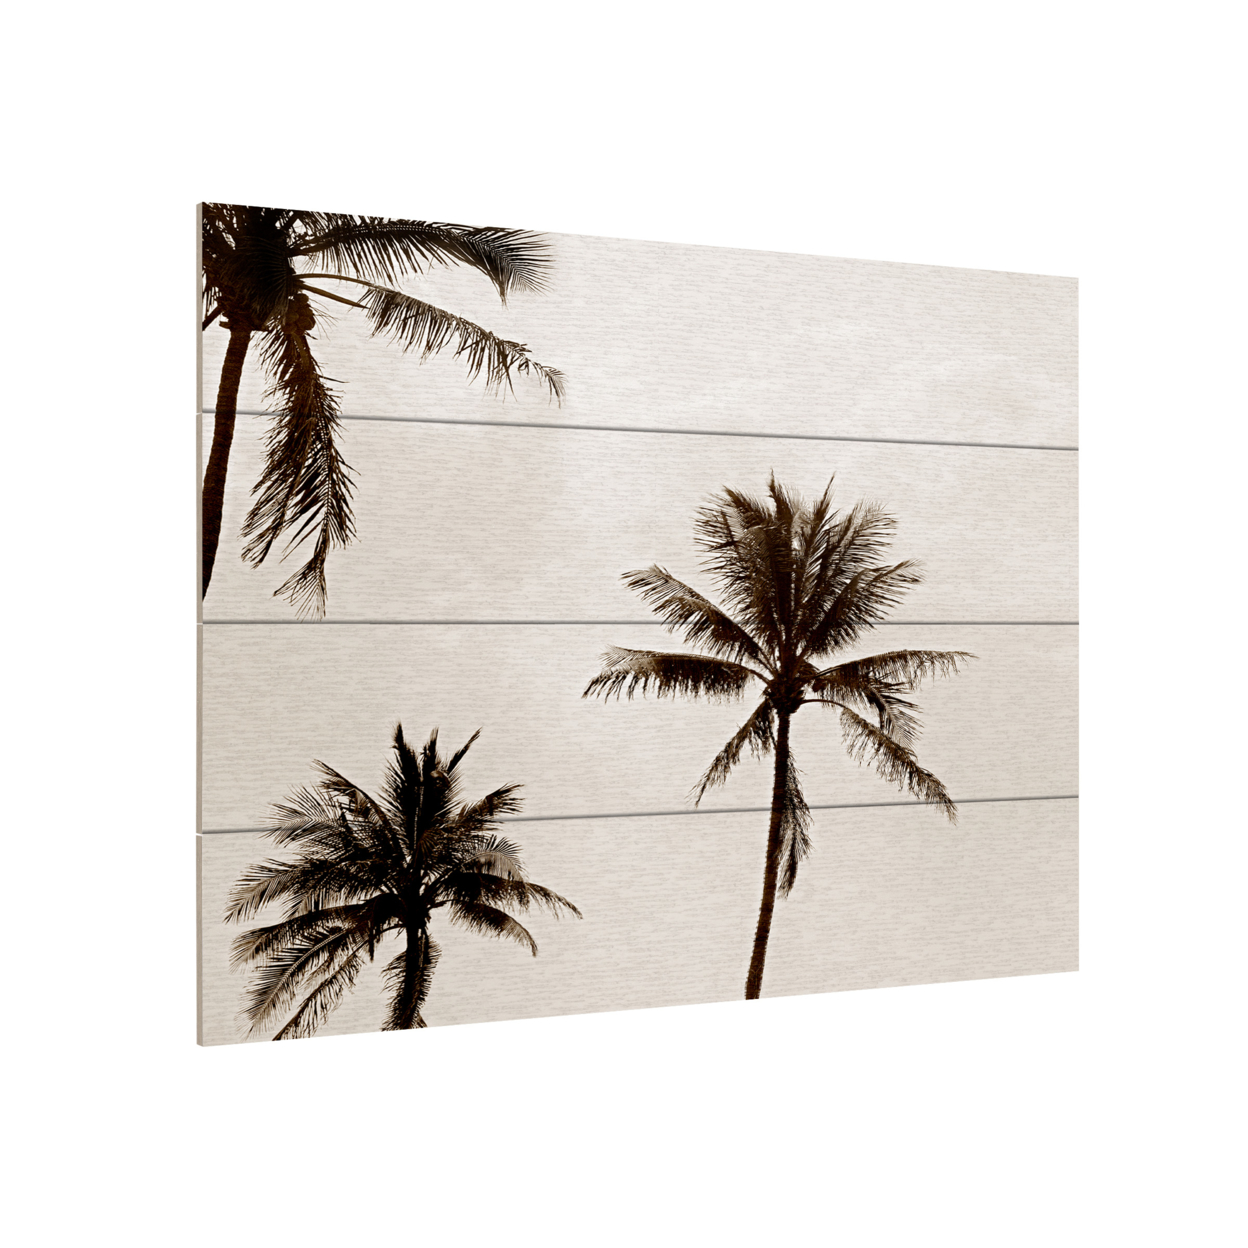 Wall Art 12 X 16 Inches Titled Black & White Palms Ready To Hang Printed On Wooden Planks